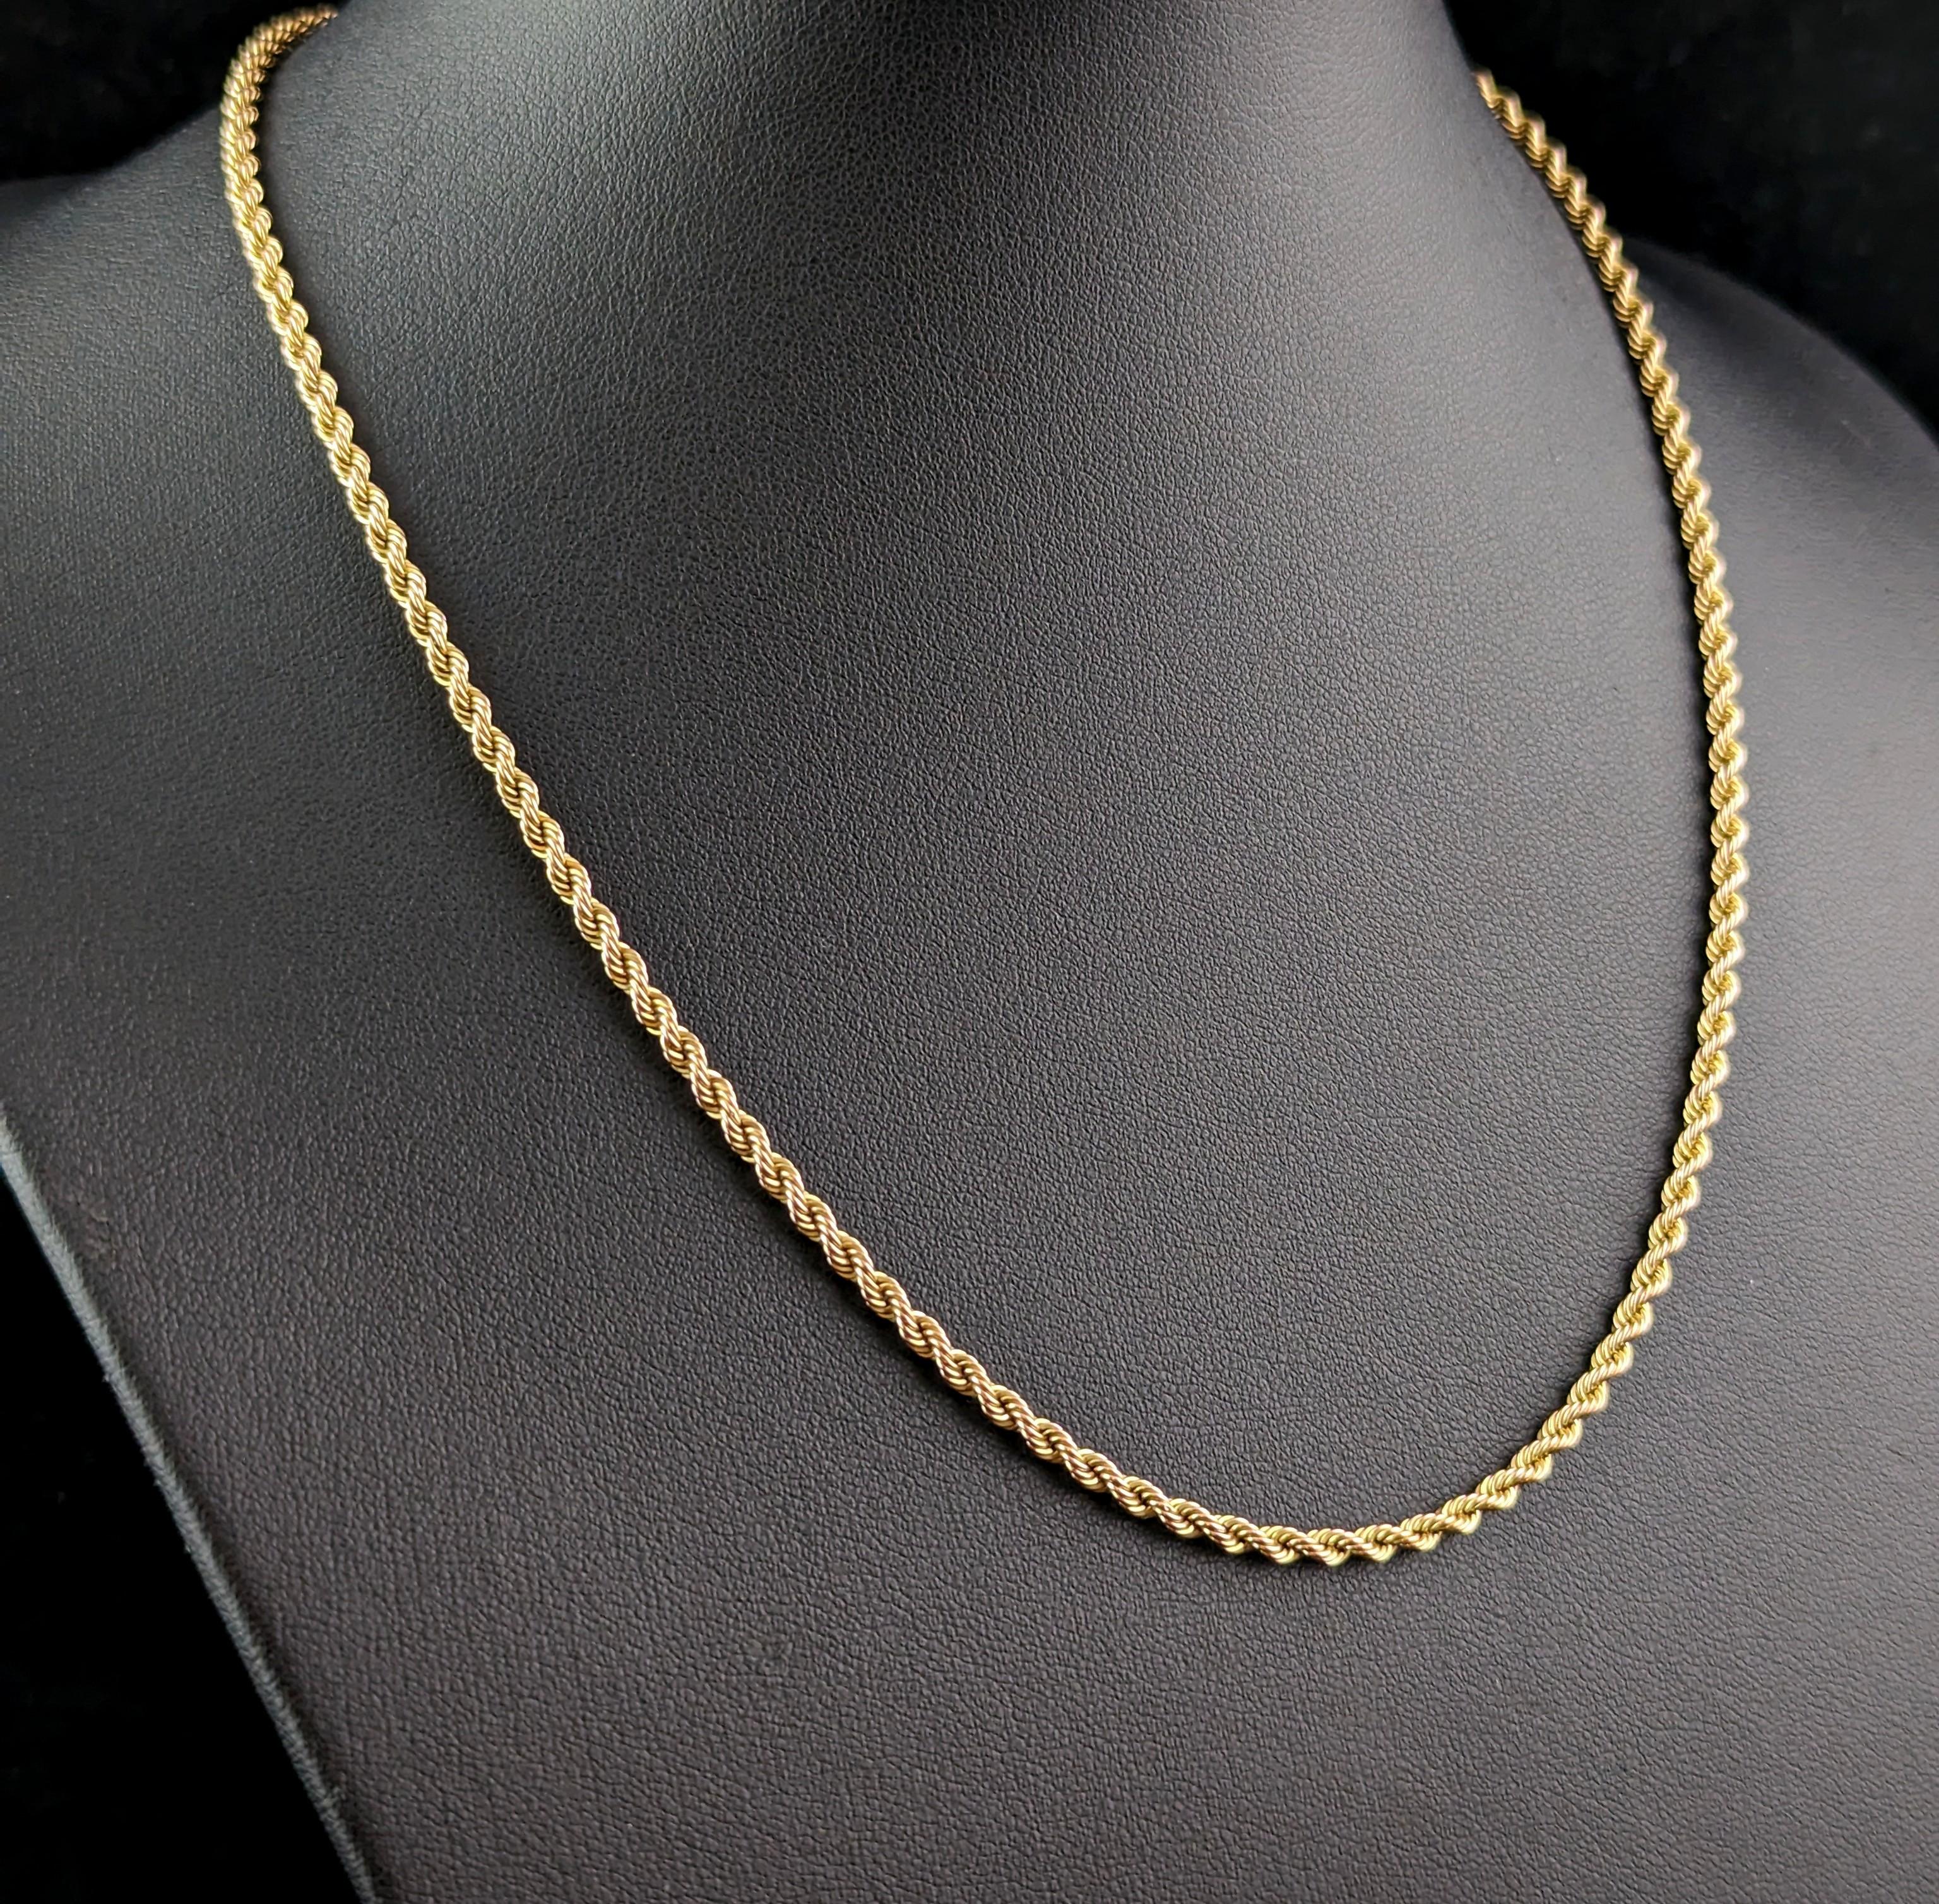 Vintage 9k yellow gold rope twist link chain necklace For Sale 3